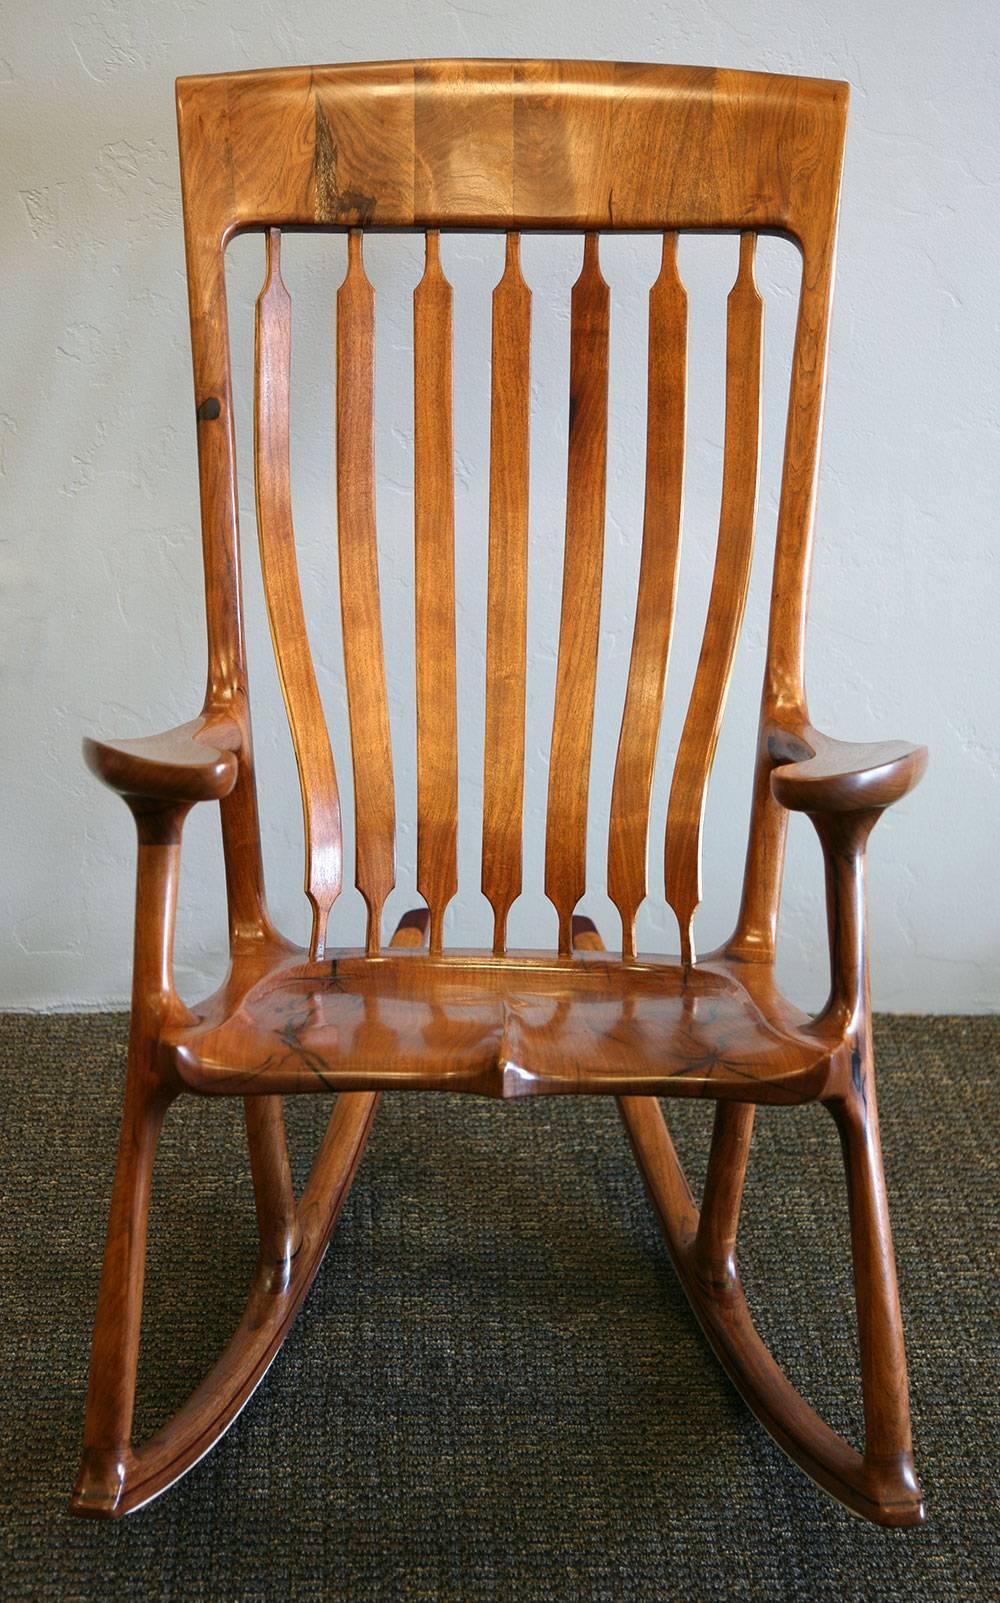 This is a handcrafted rocking chair made by Landon Sanborn. It is the product of over 500 man hours, and he only makes about one chair per year. The back rails are made of ashwood to give flexibility and comfort. The rocker runners are made of